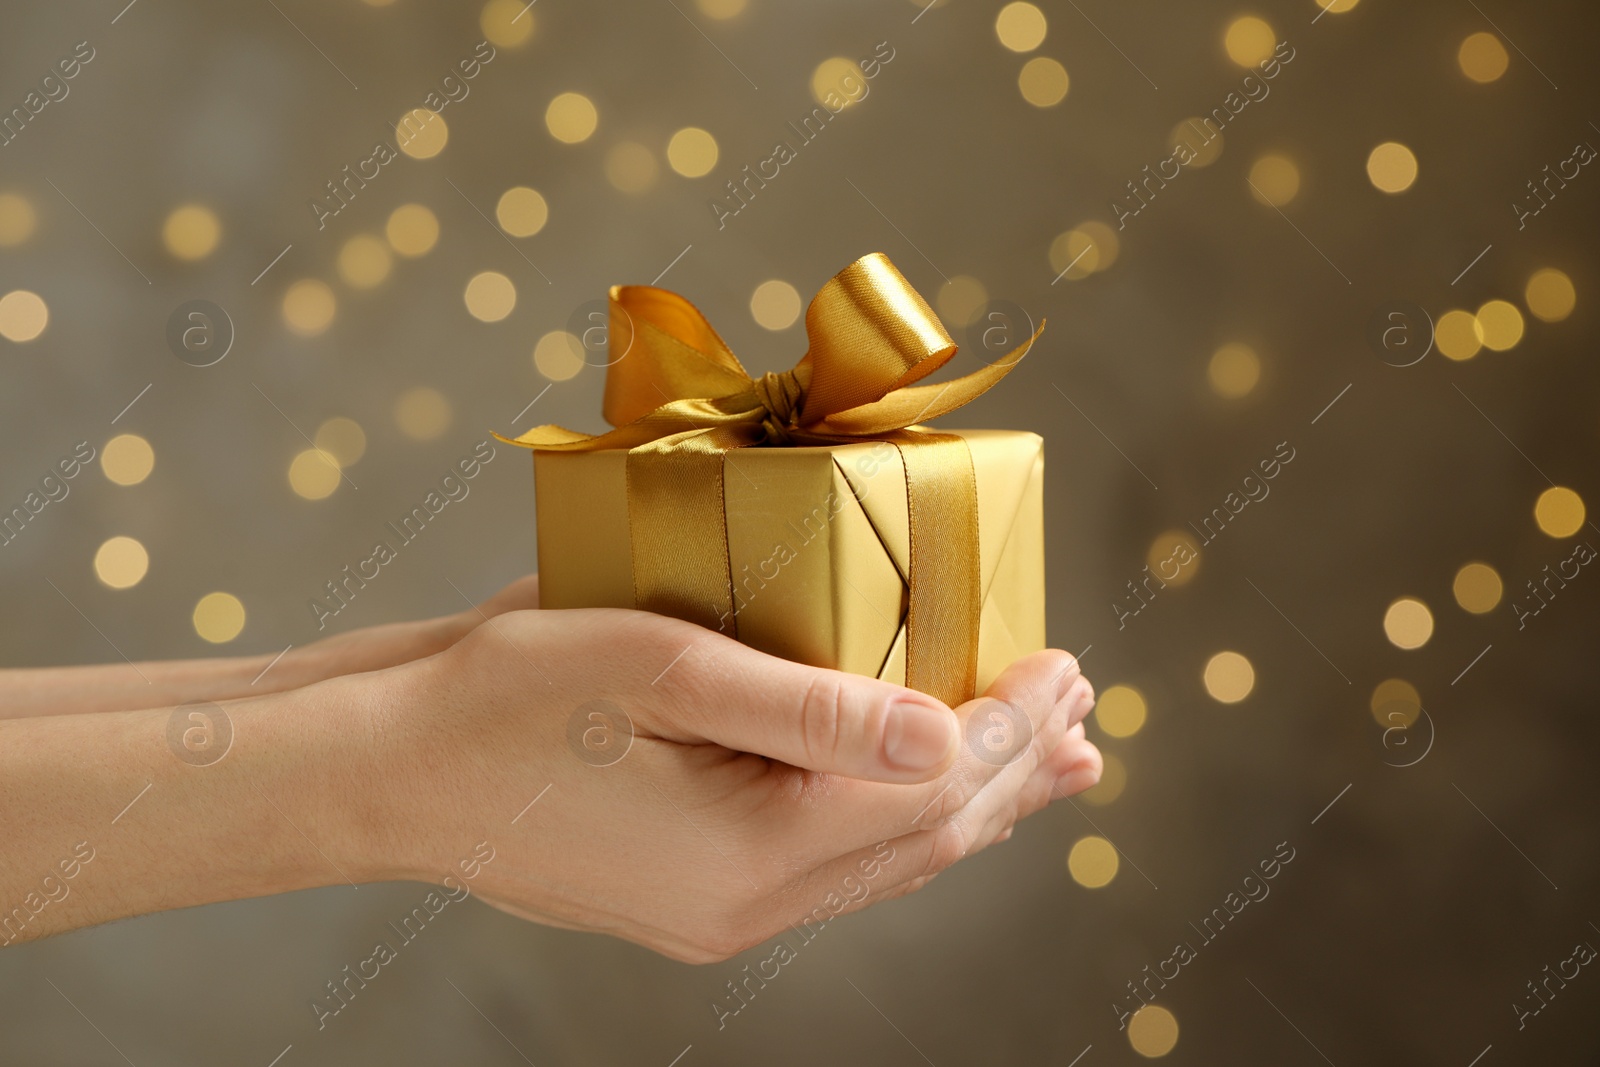 Photo of Woman holding beautifully wrapped gift box against blurred festive lights, closeup